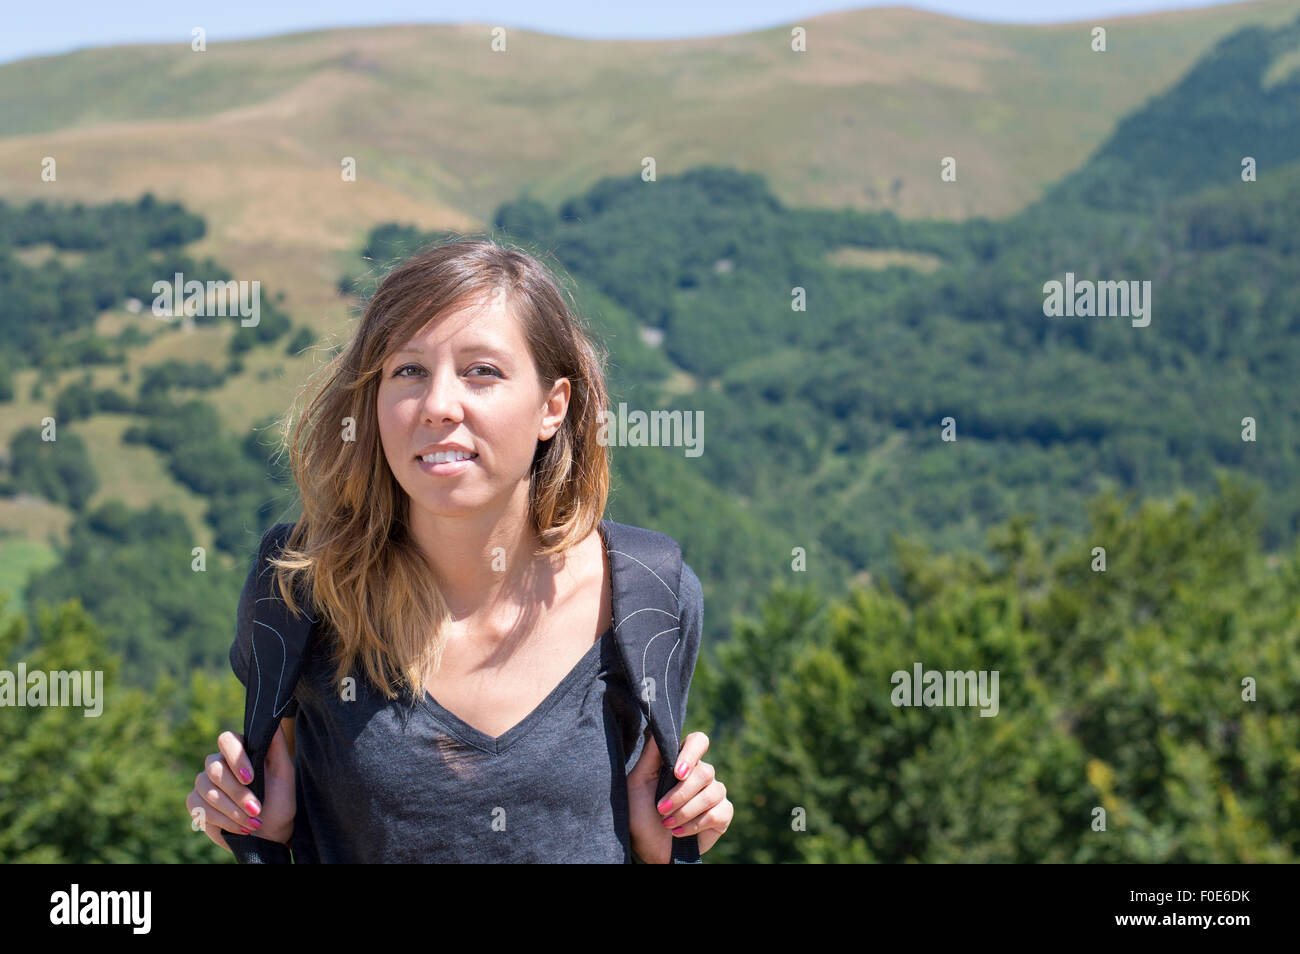 Portrait of happy girl hiker with backpack in the mountains surrounded by green vegetation. Hiking trip Stock Photo